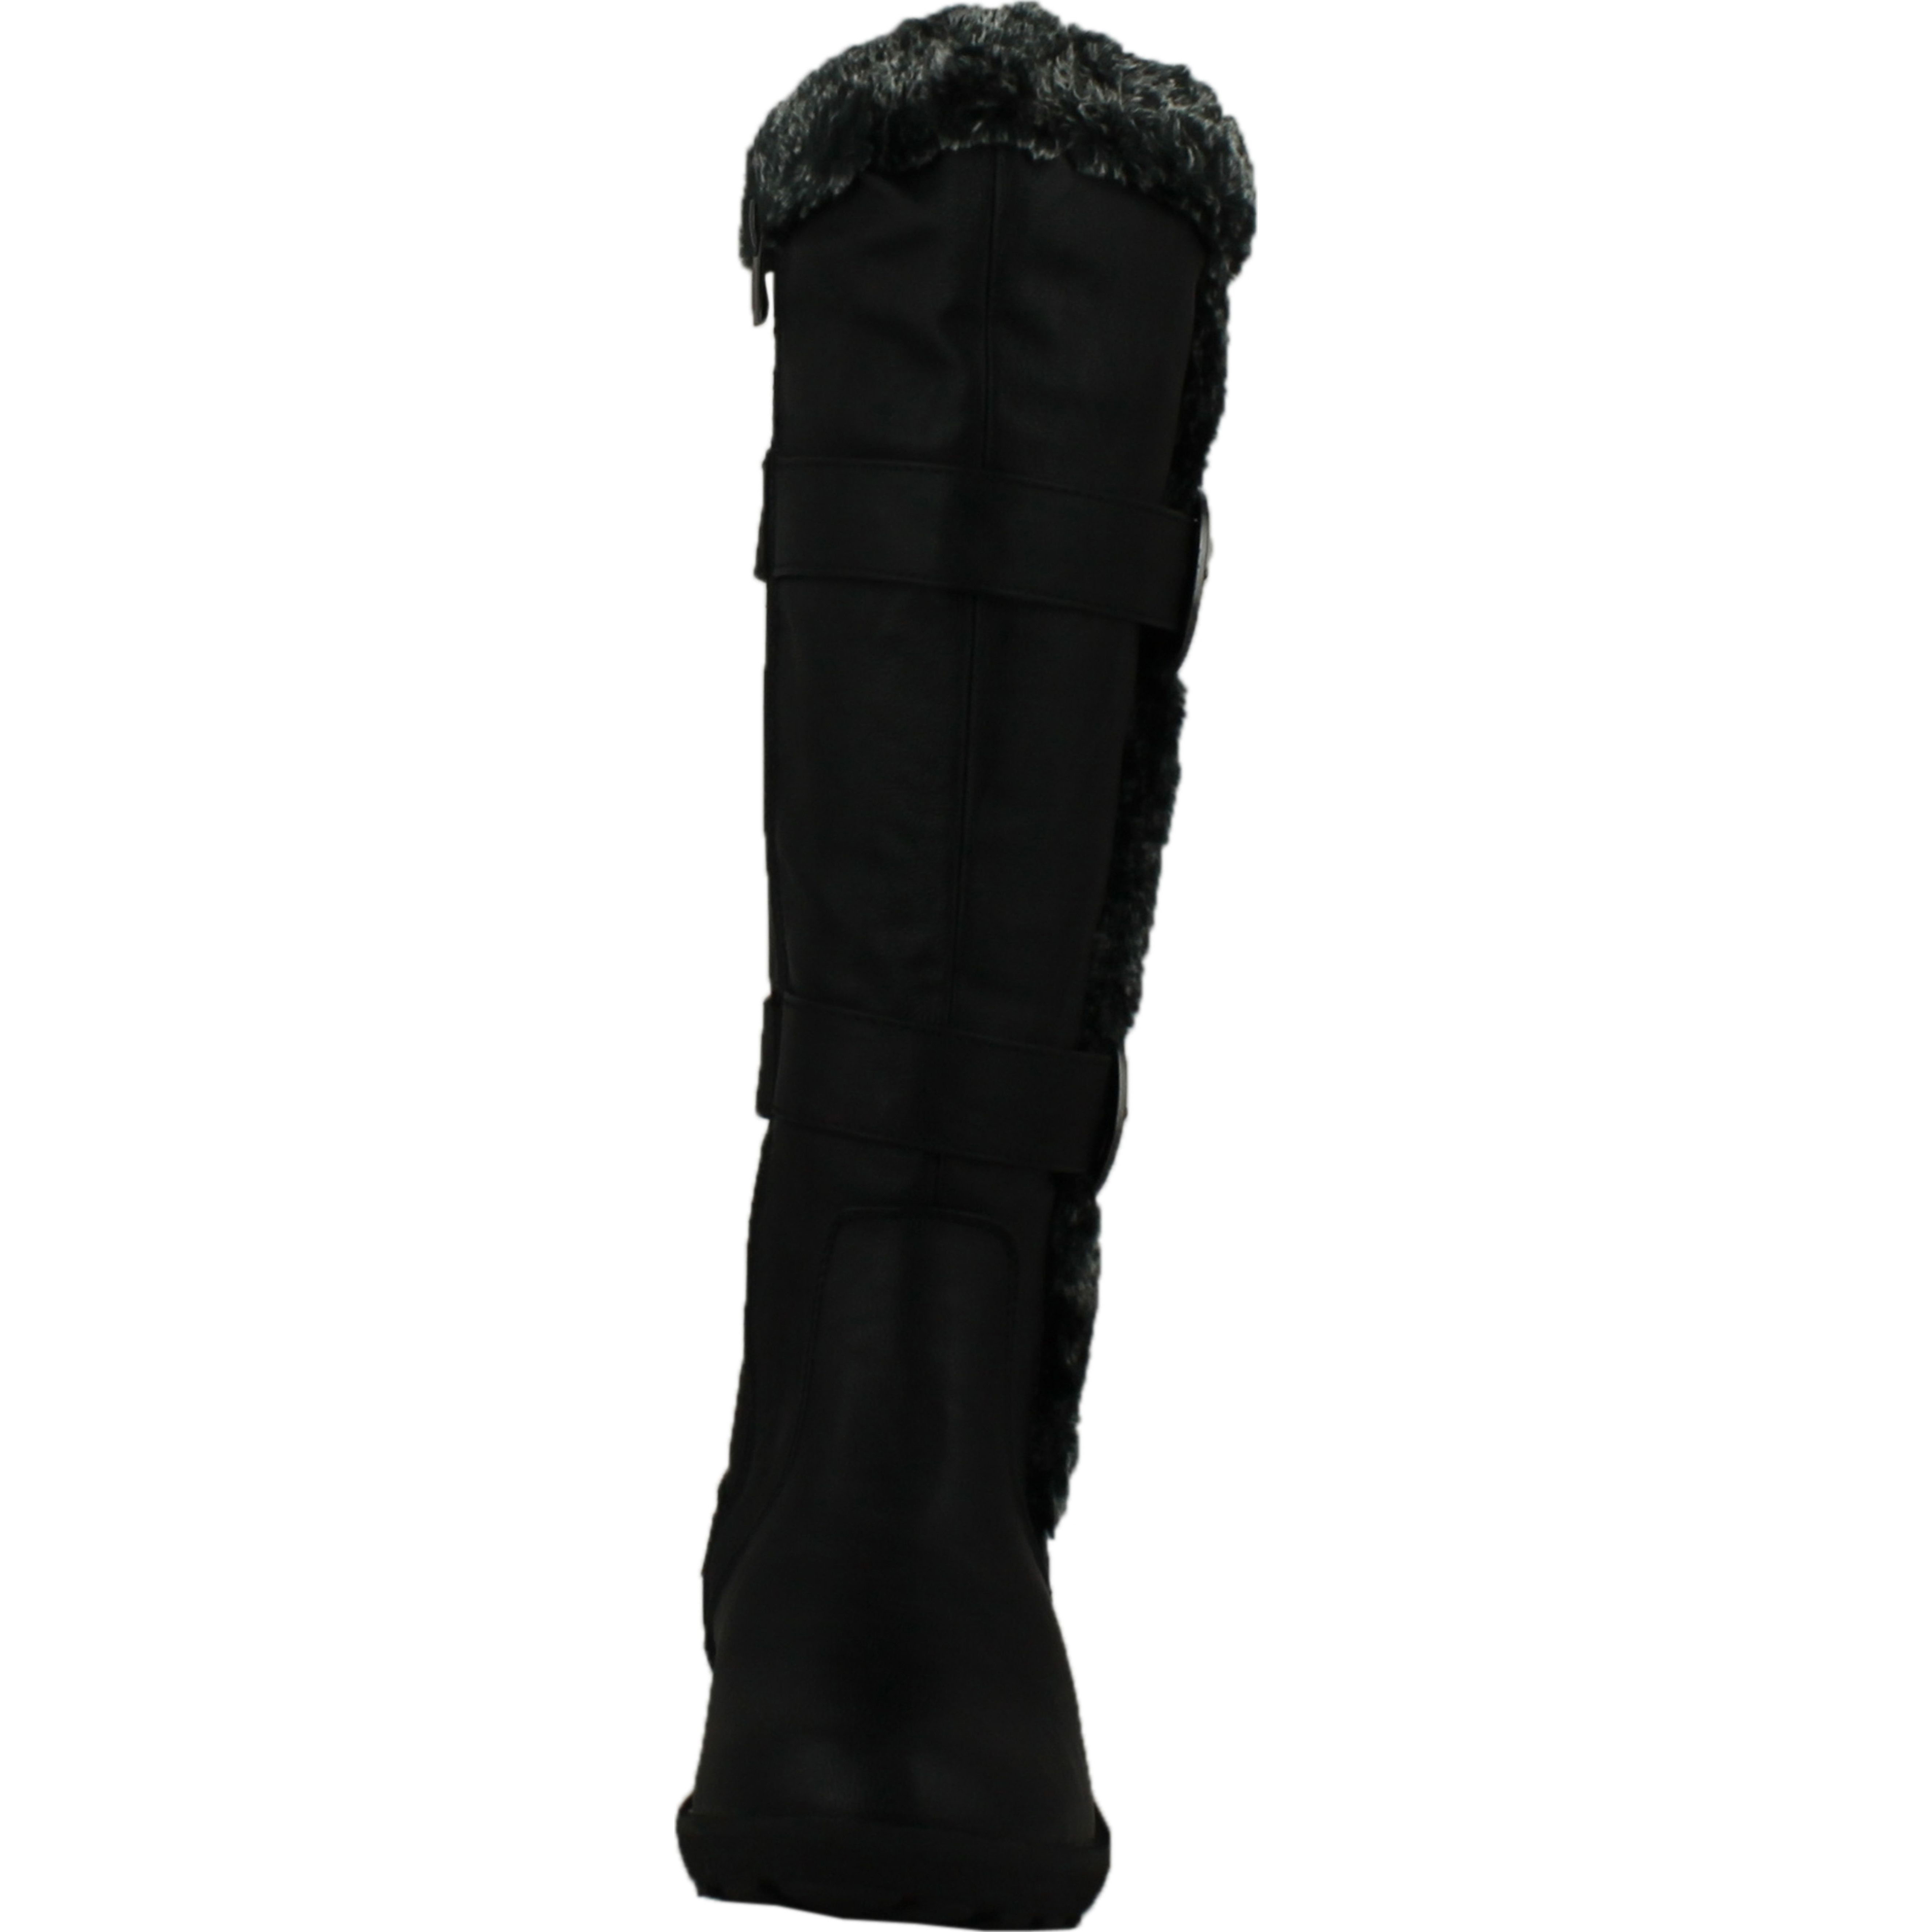 FOREVER AURA-43 Womens Double Straps Knee High Boots Winter Boots - image 3 of 4